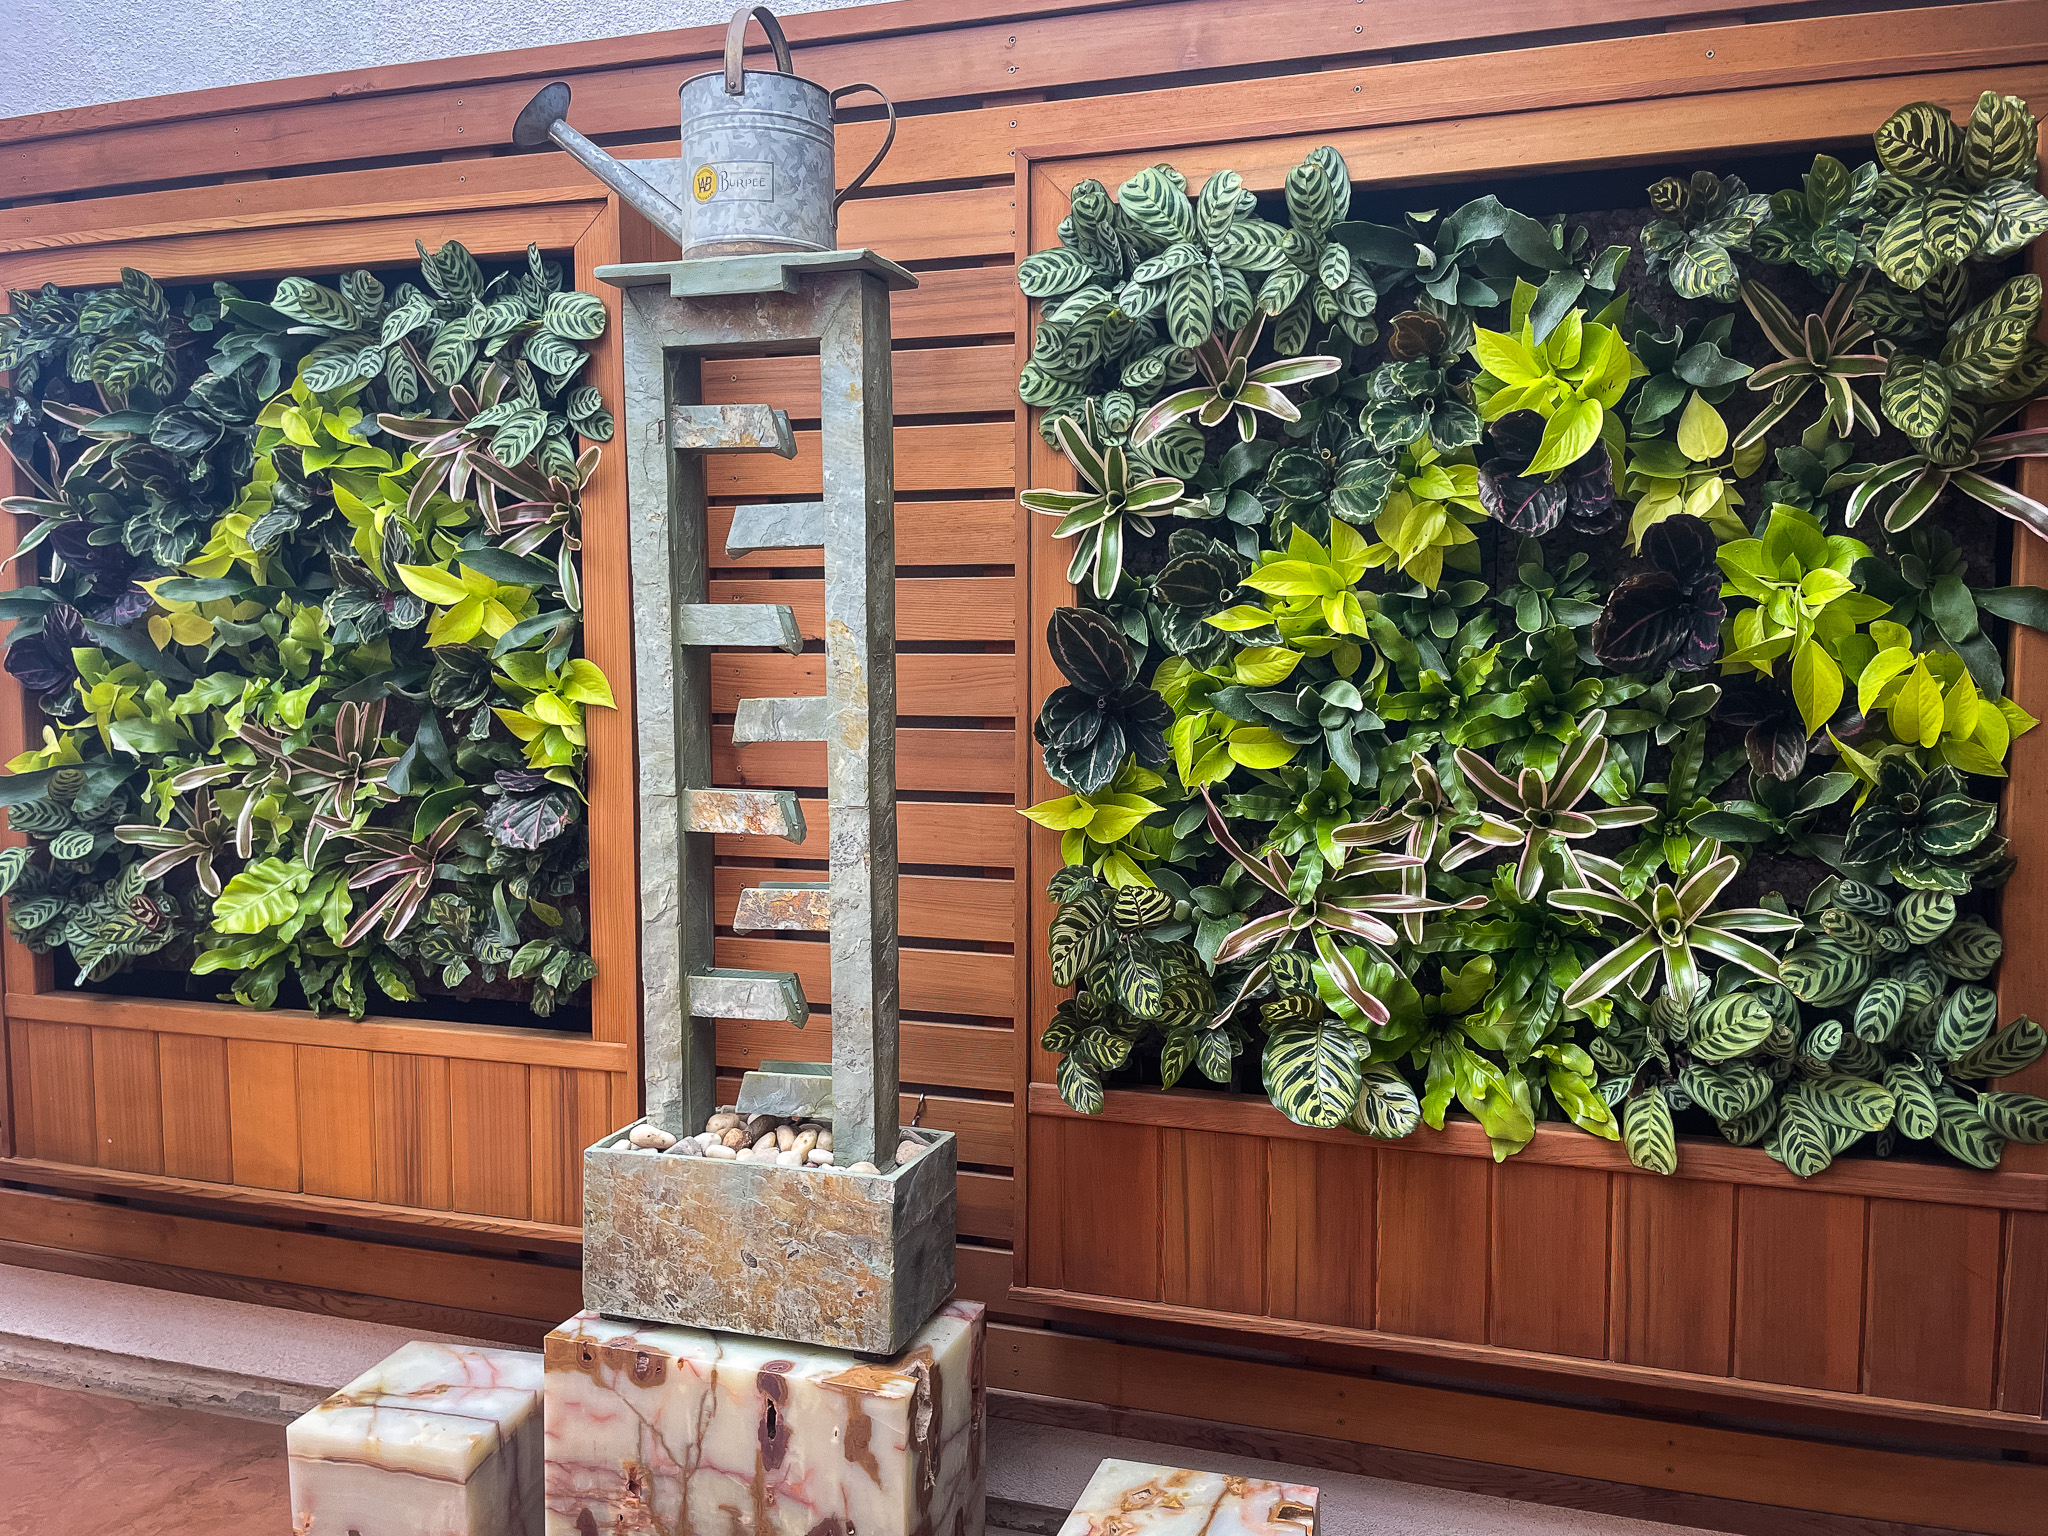 Entry way living wall systems side by side with tropical living plants